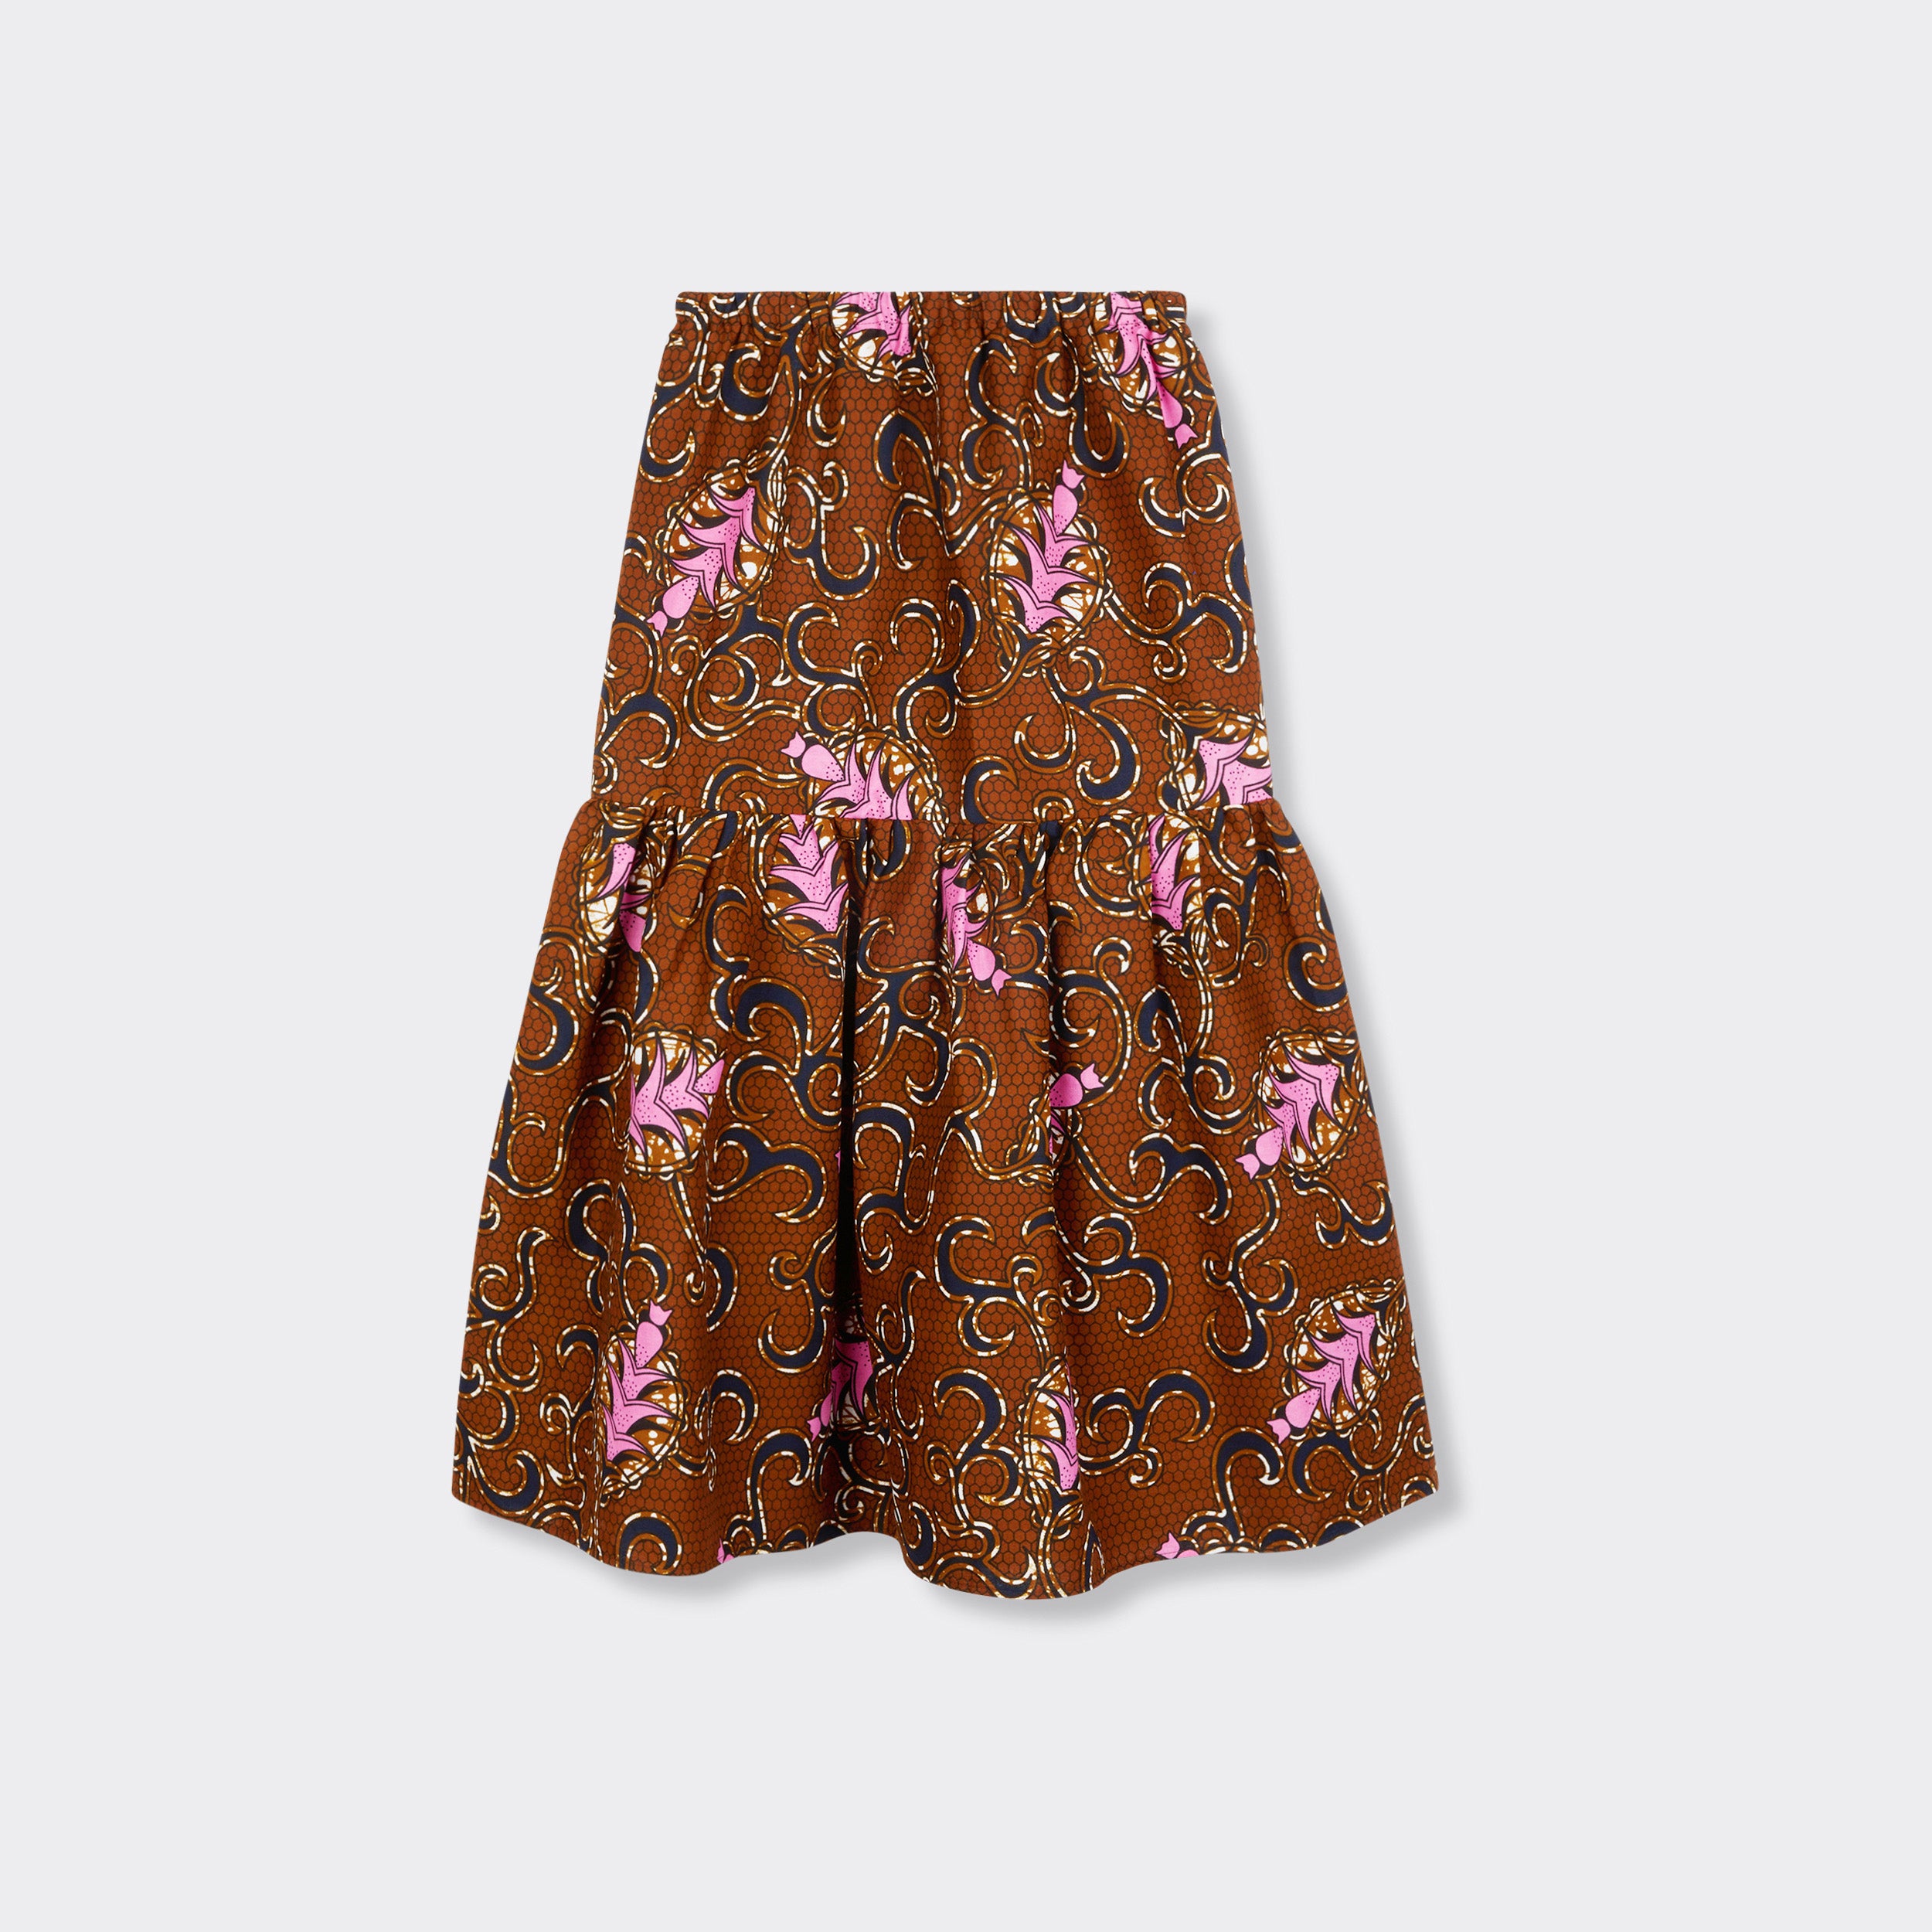 Still life: Flounced Maxi Skirt Baby in Wax Tumeric with colors brown and pink